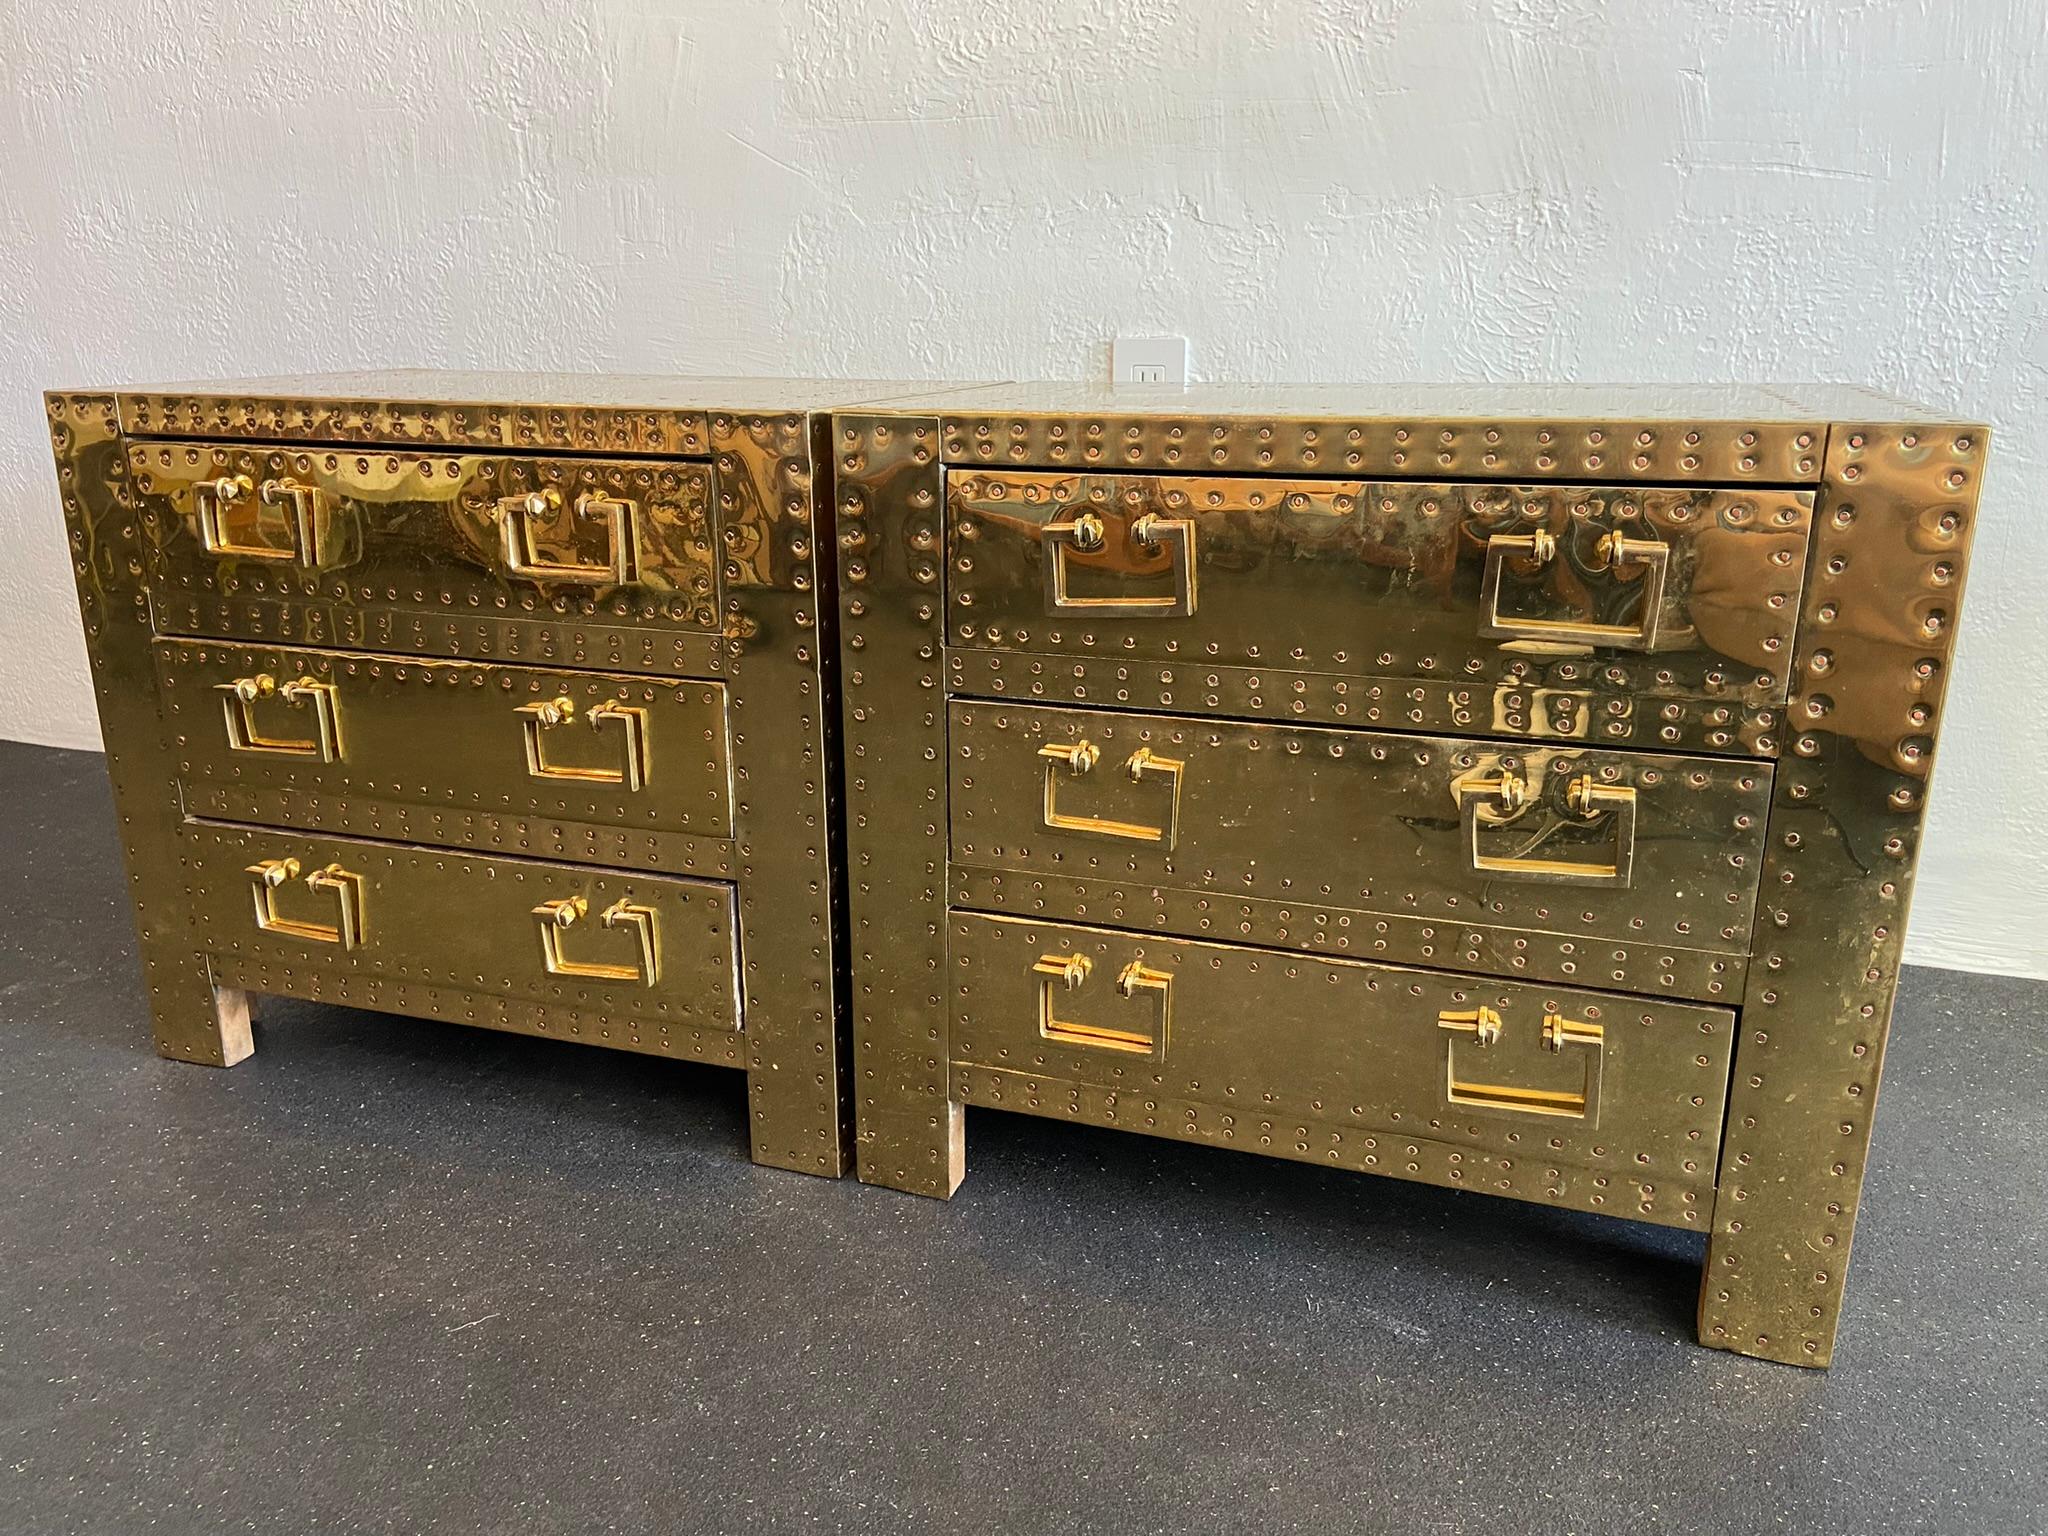 Pair of brass and copper clad chest by Sarreid LTD. Polished within the last few years. Brass applied over wood frames with copper brads. Heavy, solid construction. Dents and marks are present, consistent with normal wear from use on these pieces.